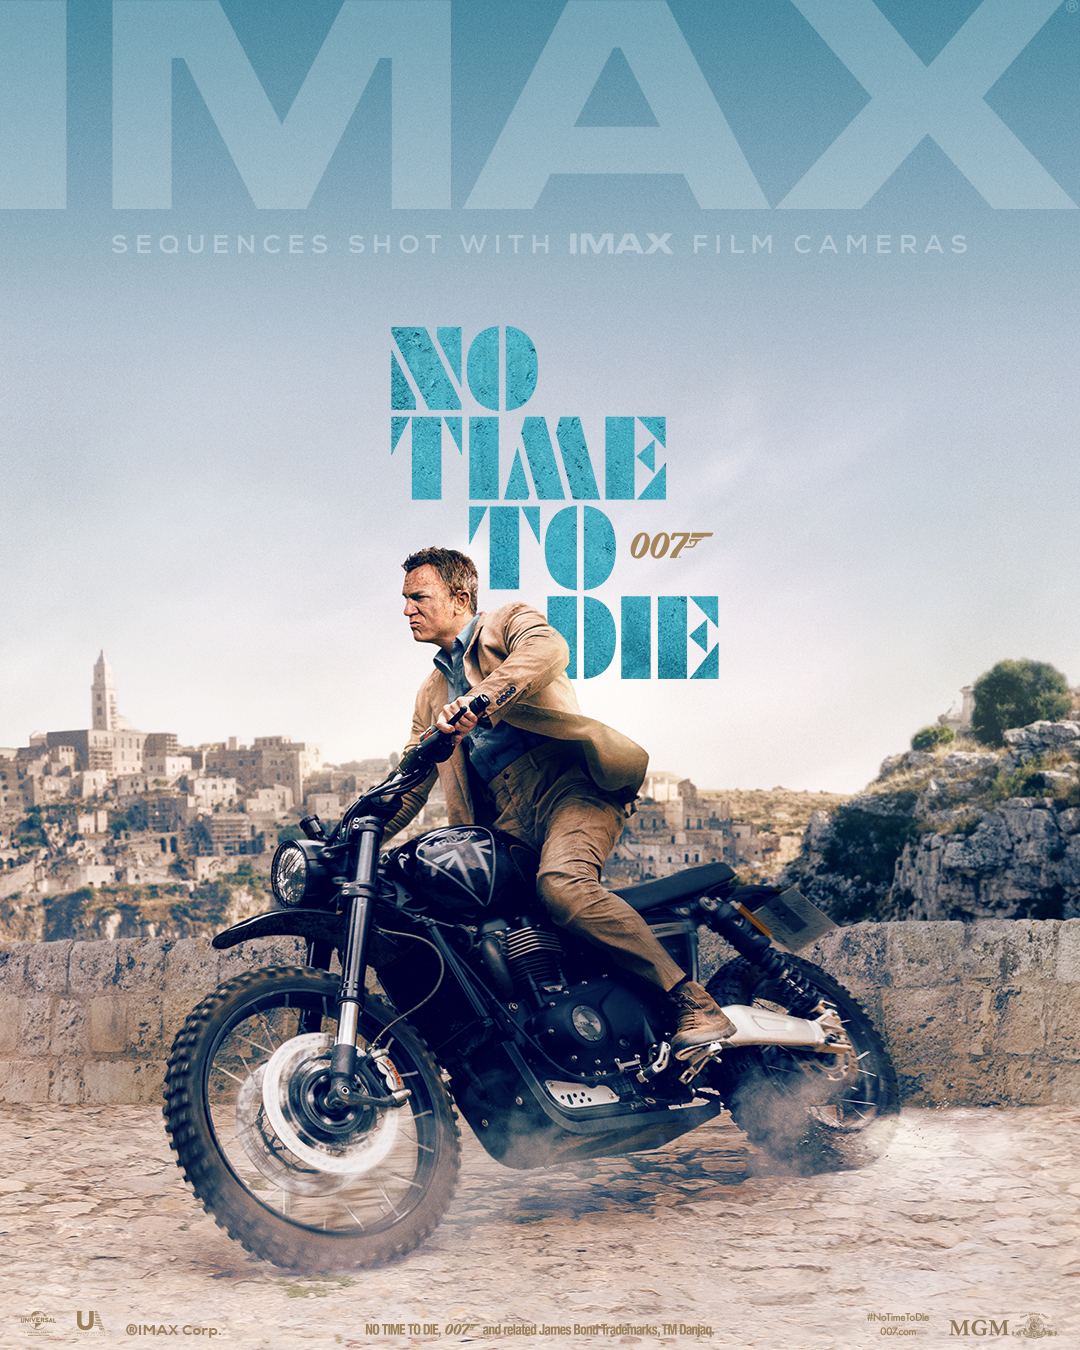 3638060-imax_no time to die_exclusive.jpg